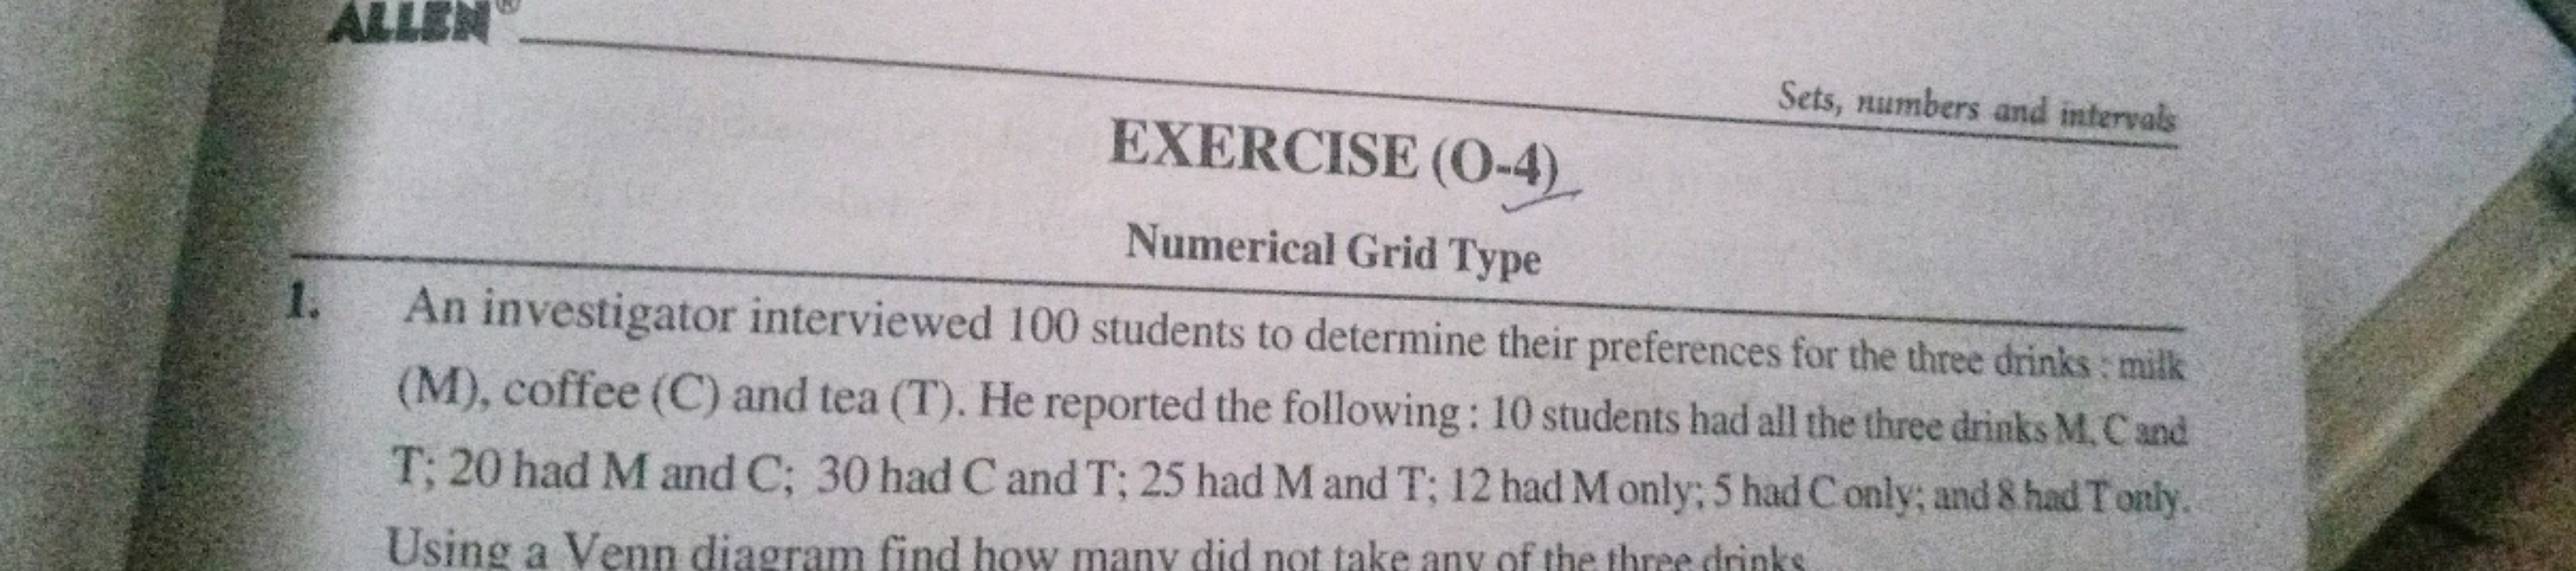 Sets, numbers and intervals
EXERCISE (O-4)
Numerical Grid Type
1. An i